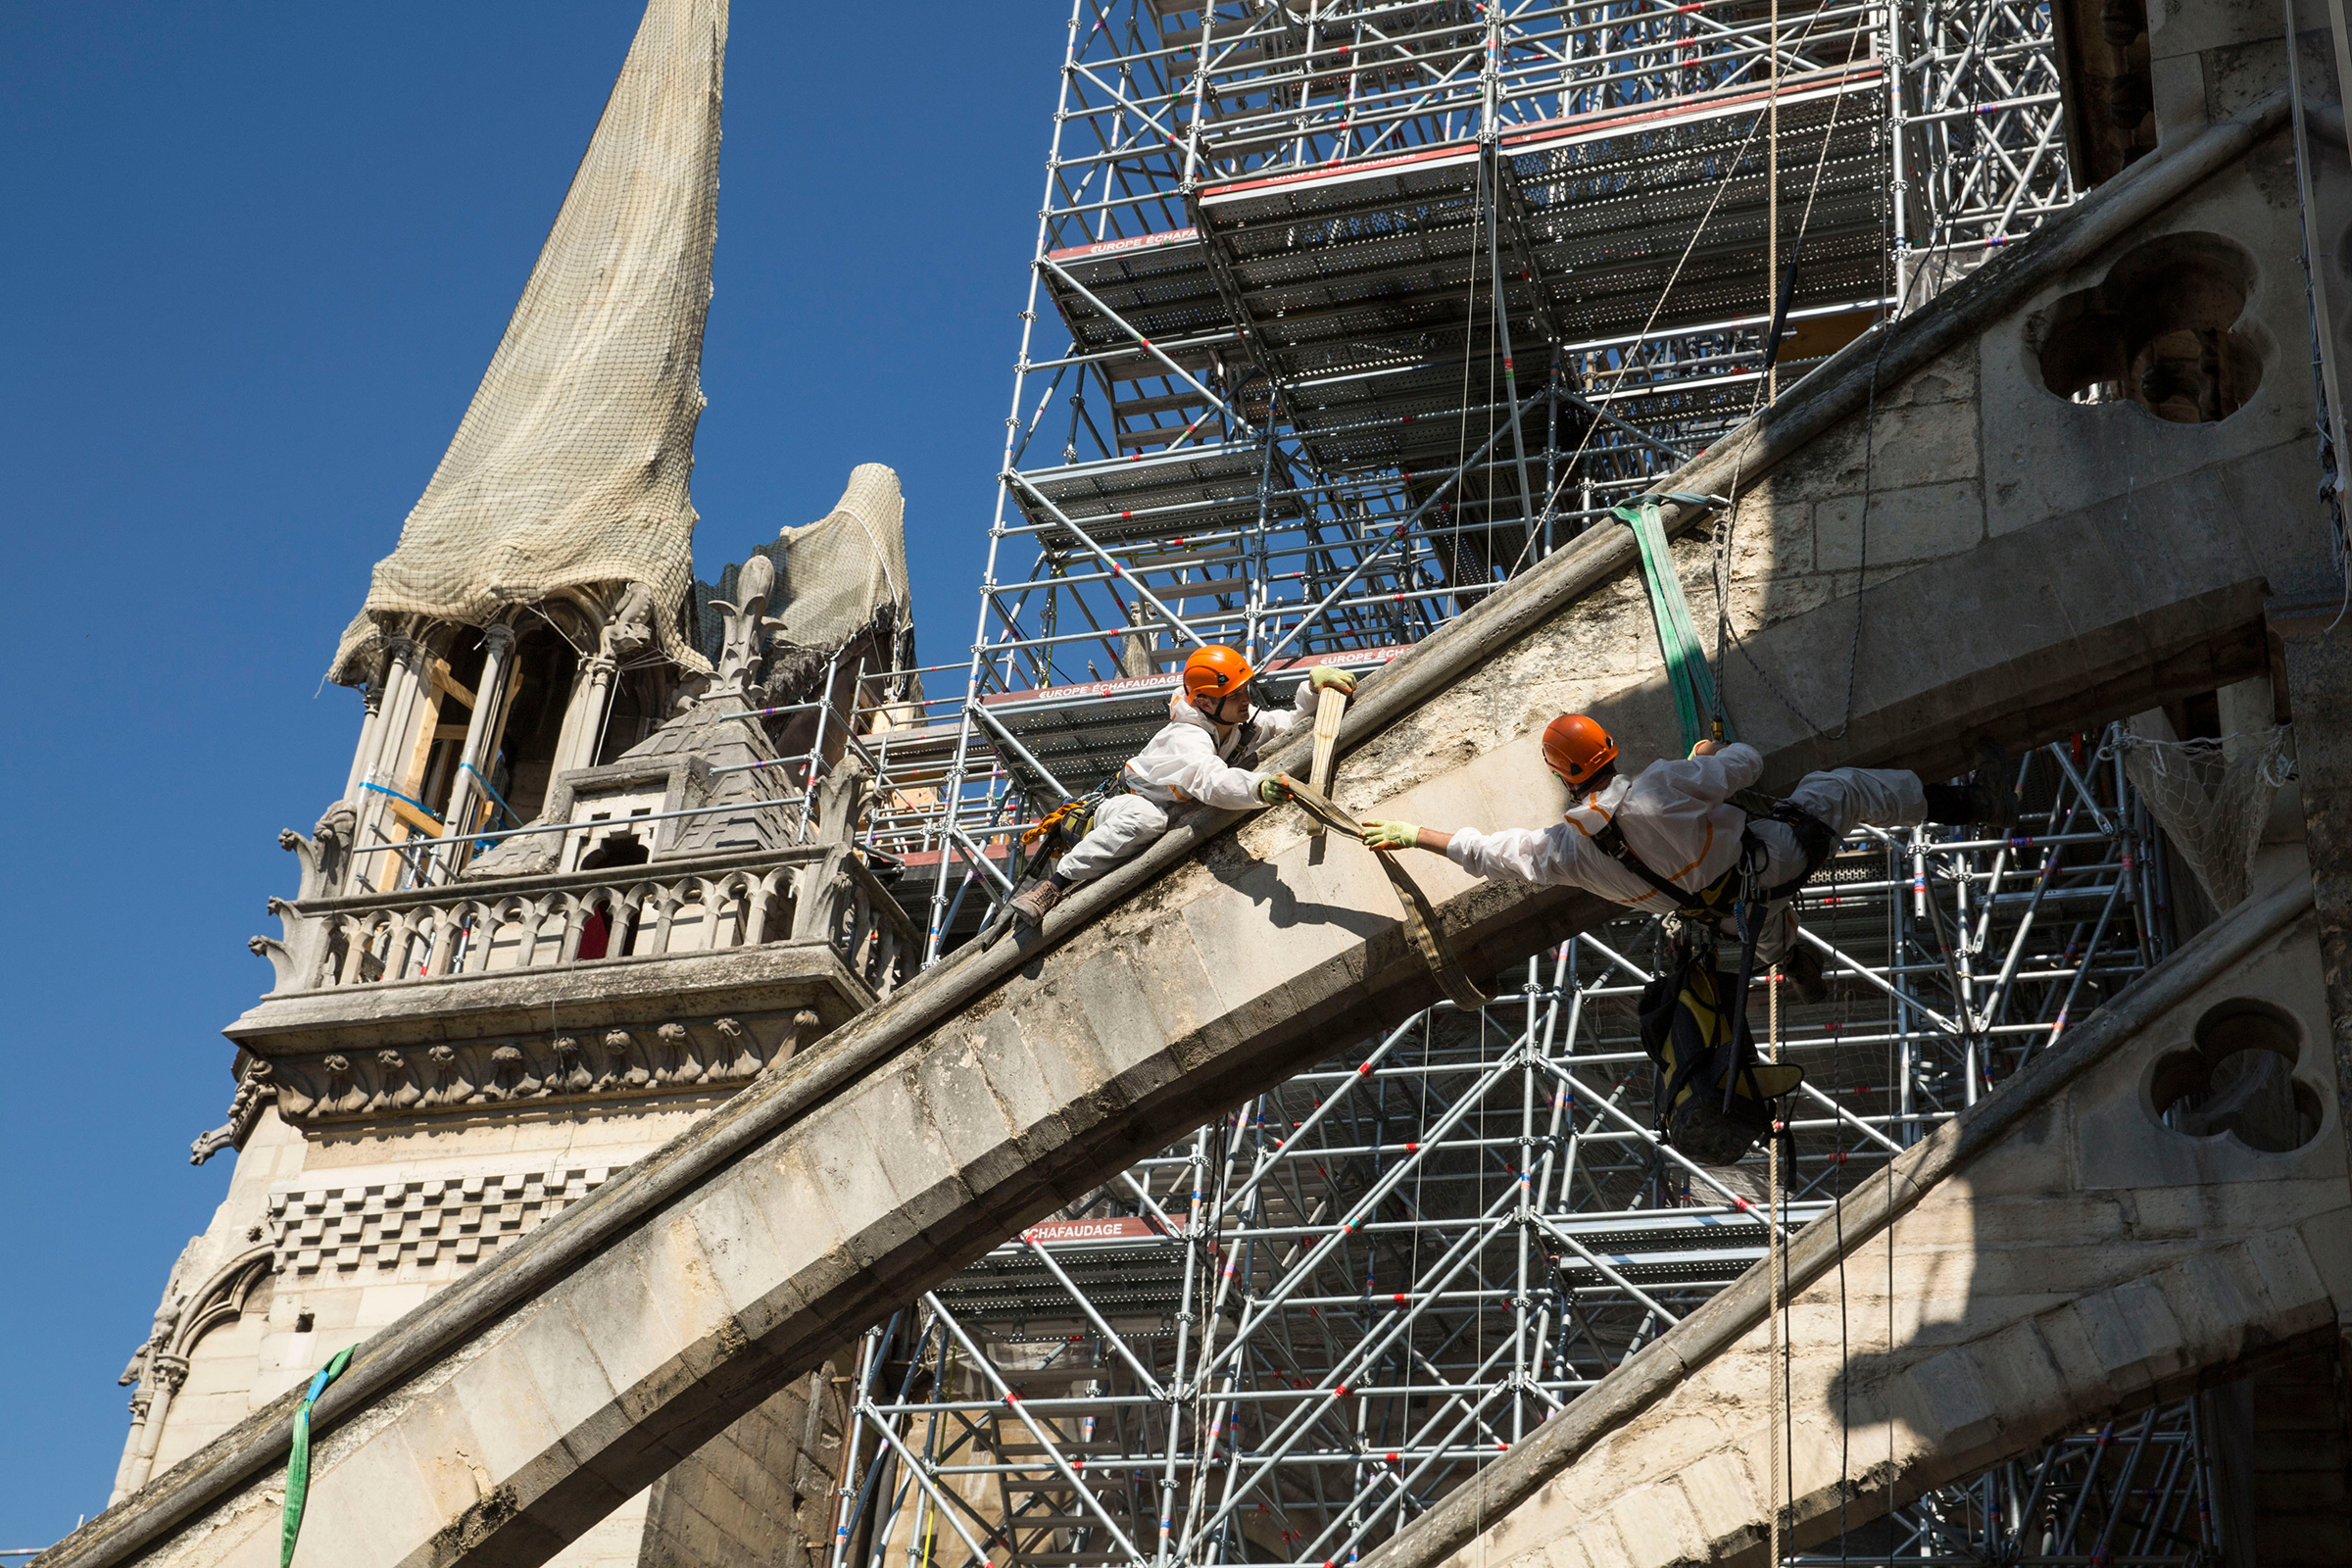 Workers prepare the flying buttresses, where wooden arches will be installed to support the structure. (Patrick Zachmann—Magnum Photos for TIME)